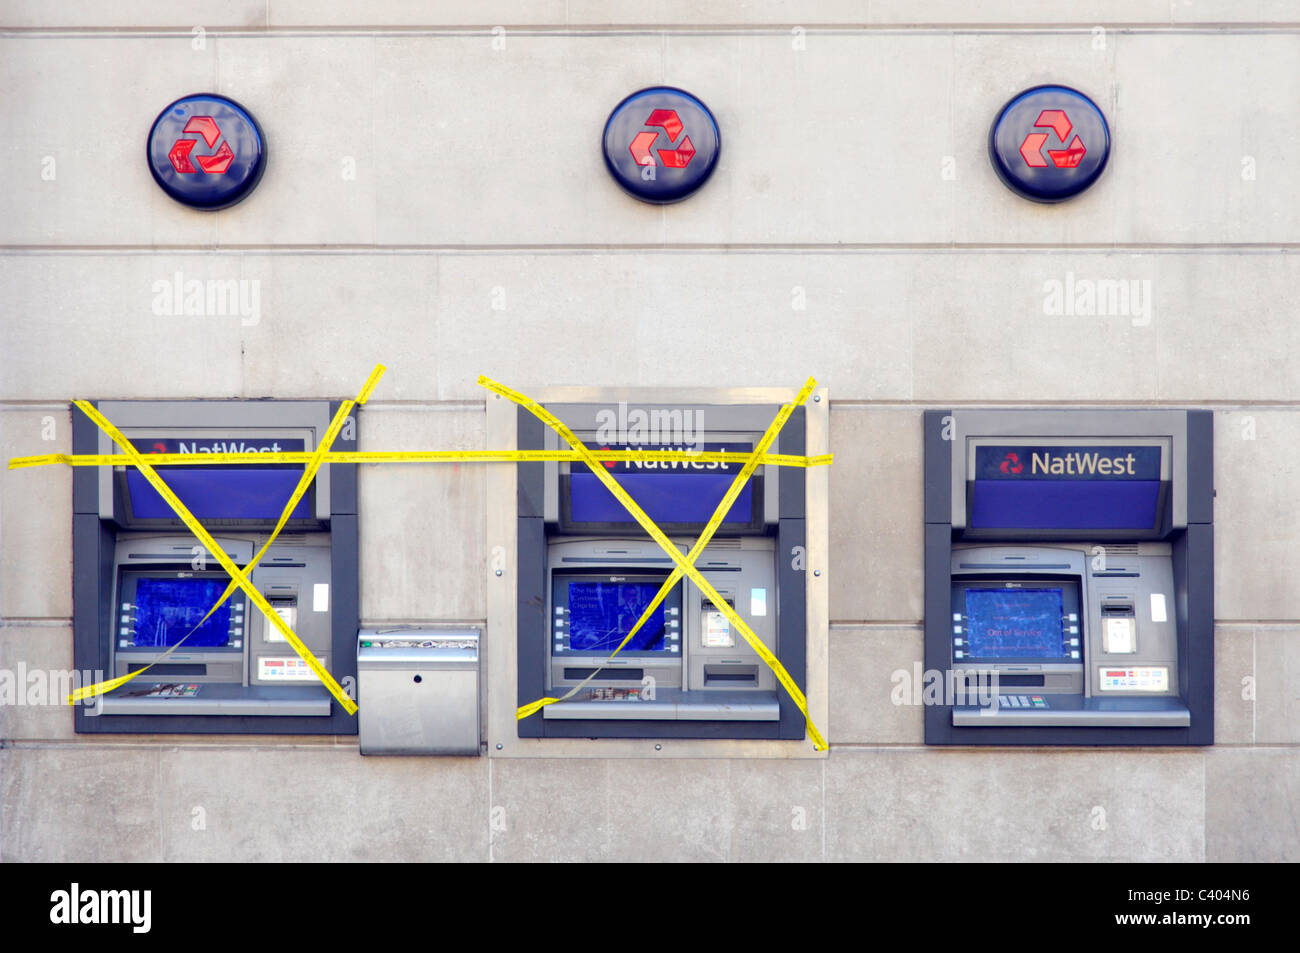 NatWest bank branch premises external outdoor atm cash machines two out of order covered in yellow tape one machine working London England UK Stock Photo